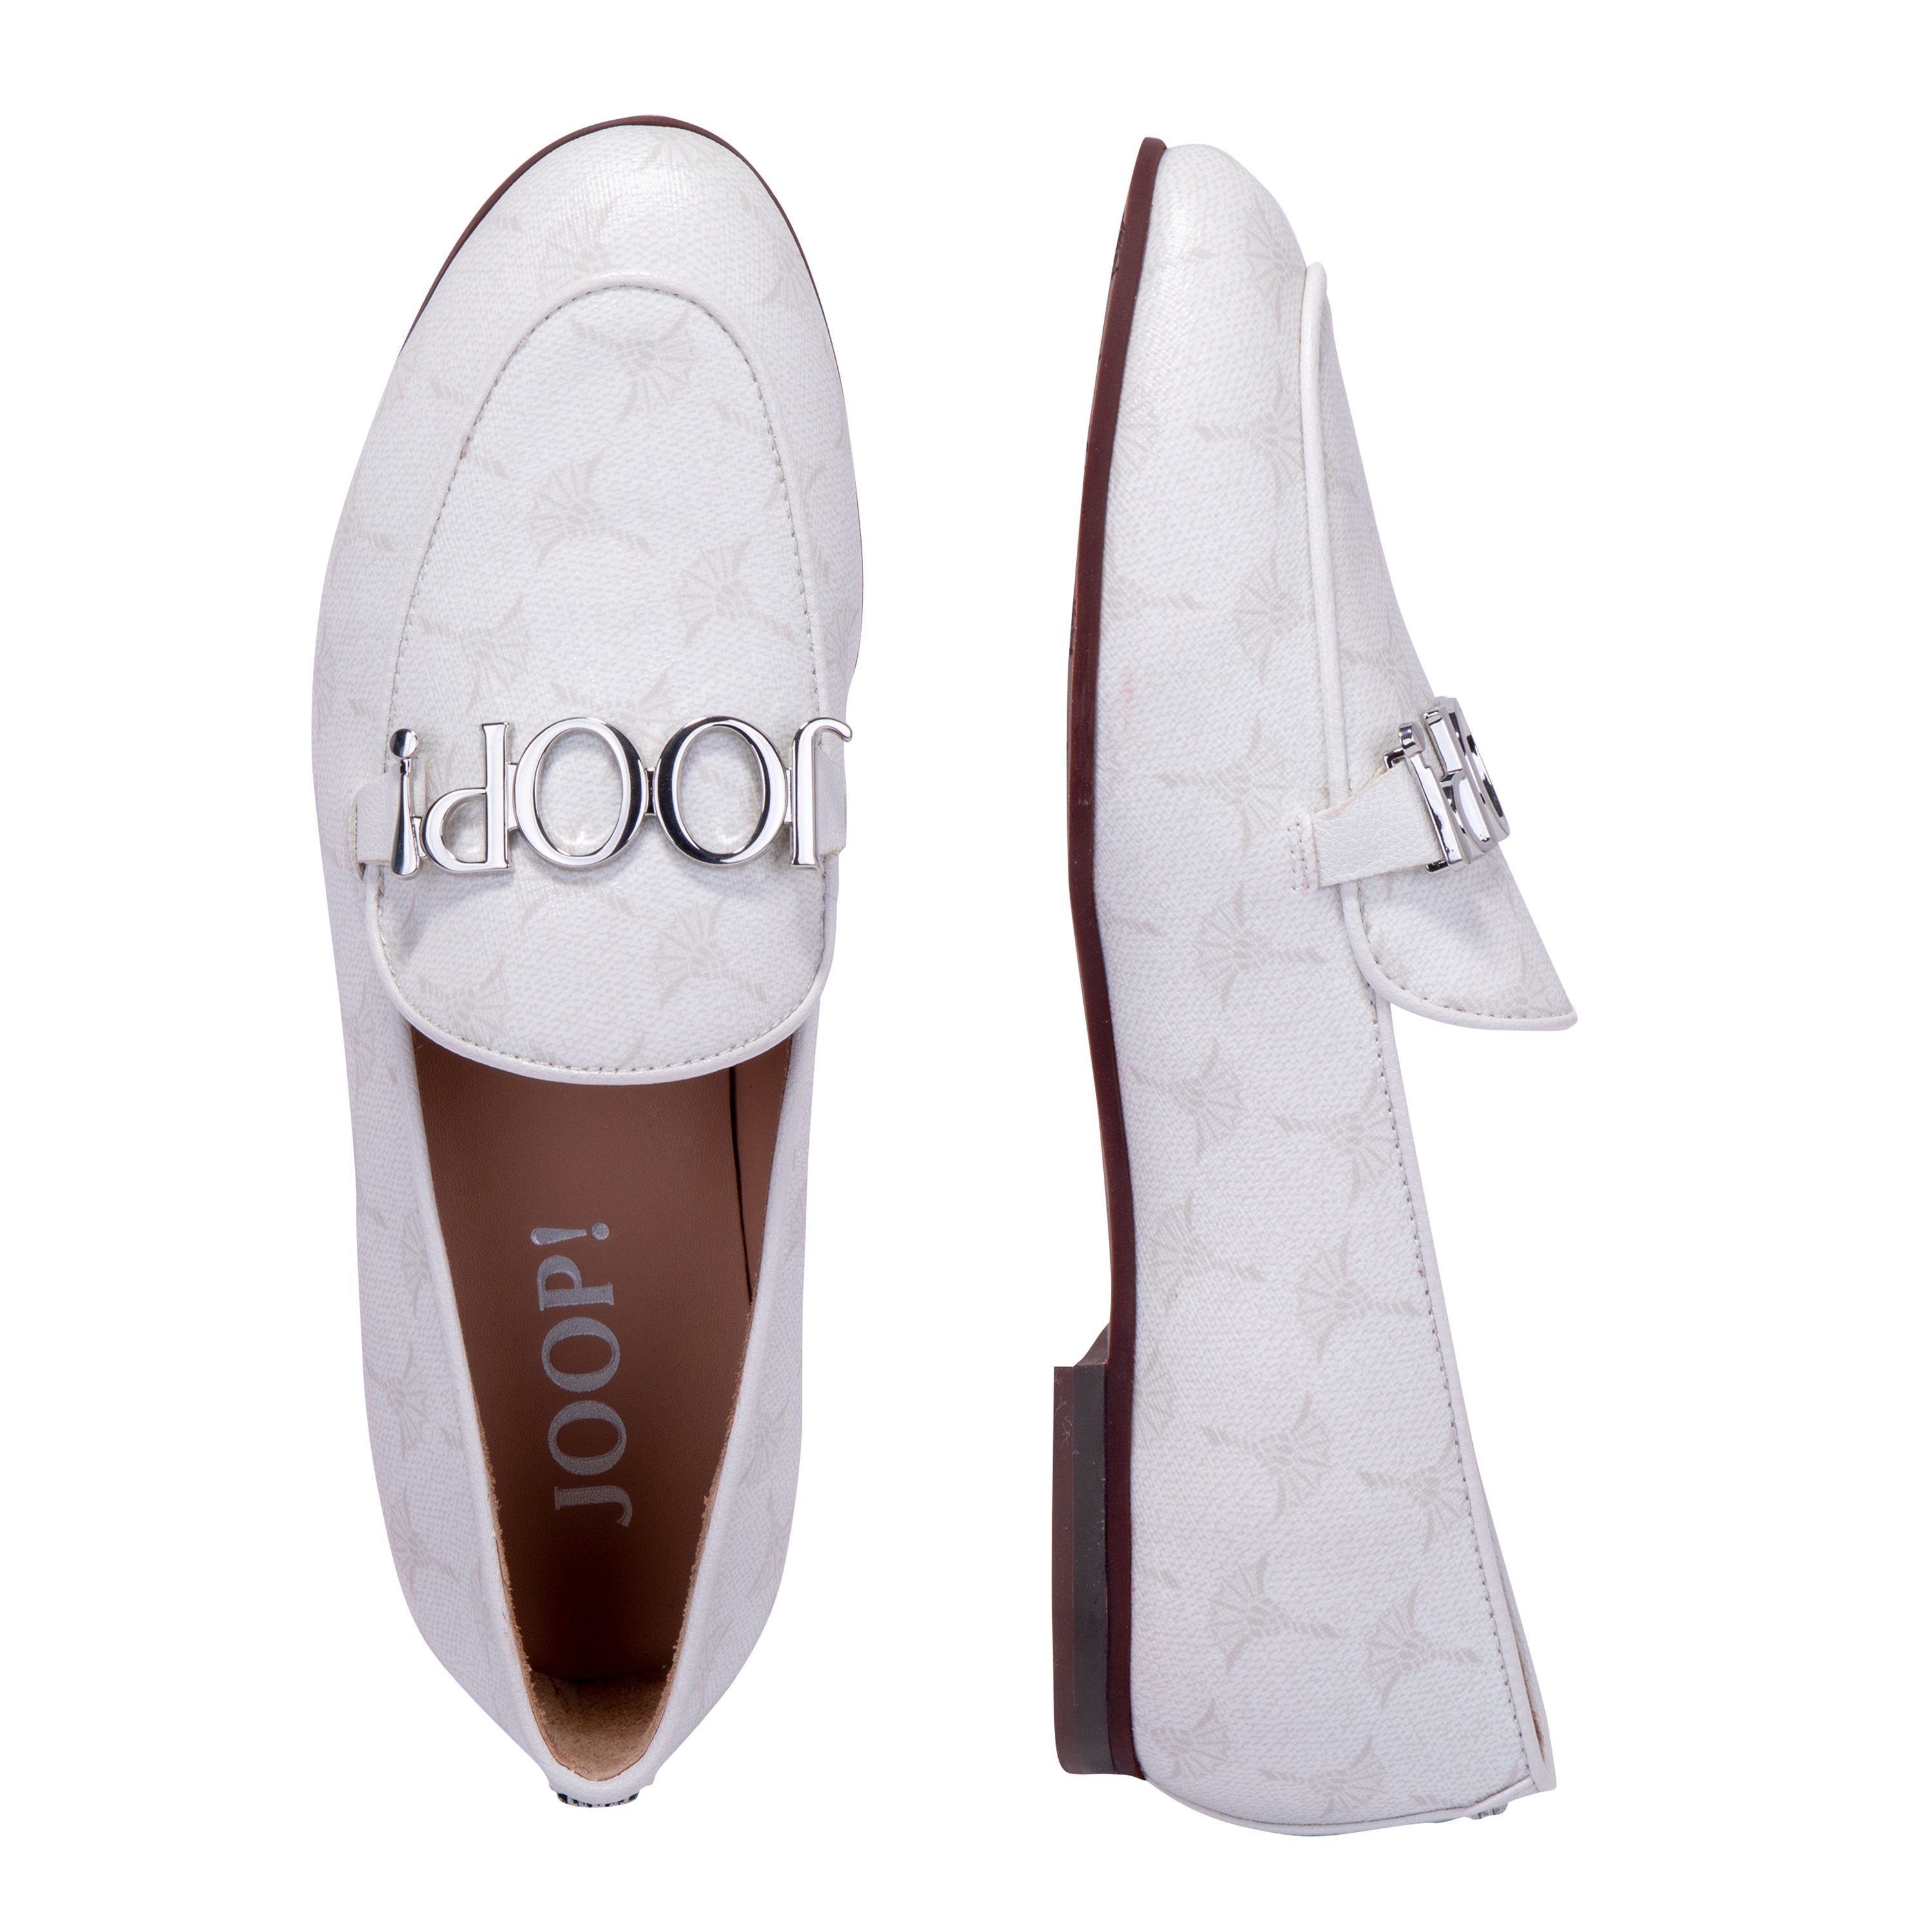 outer: offwhite Joop! Slipper inner: synthetic, microfibre